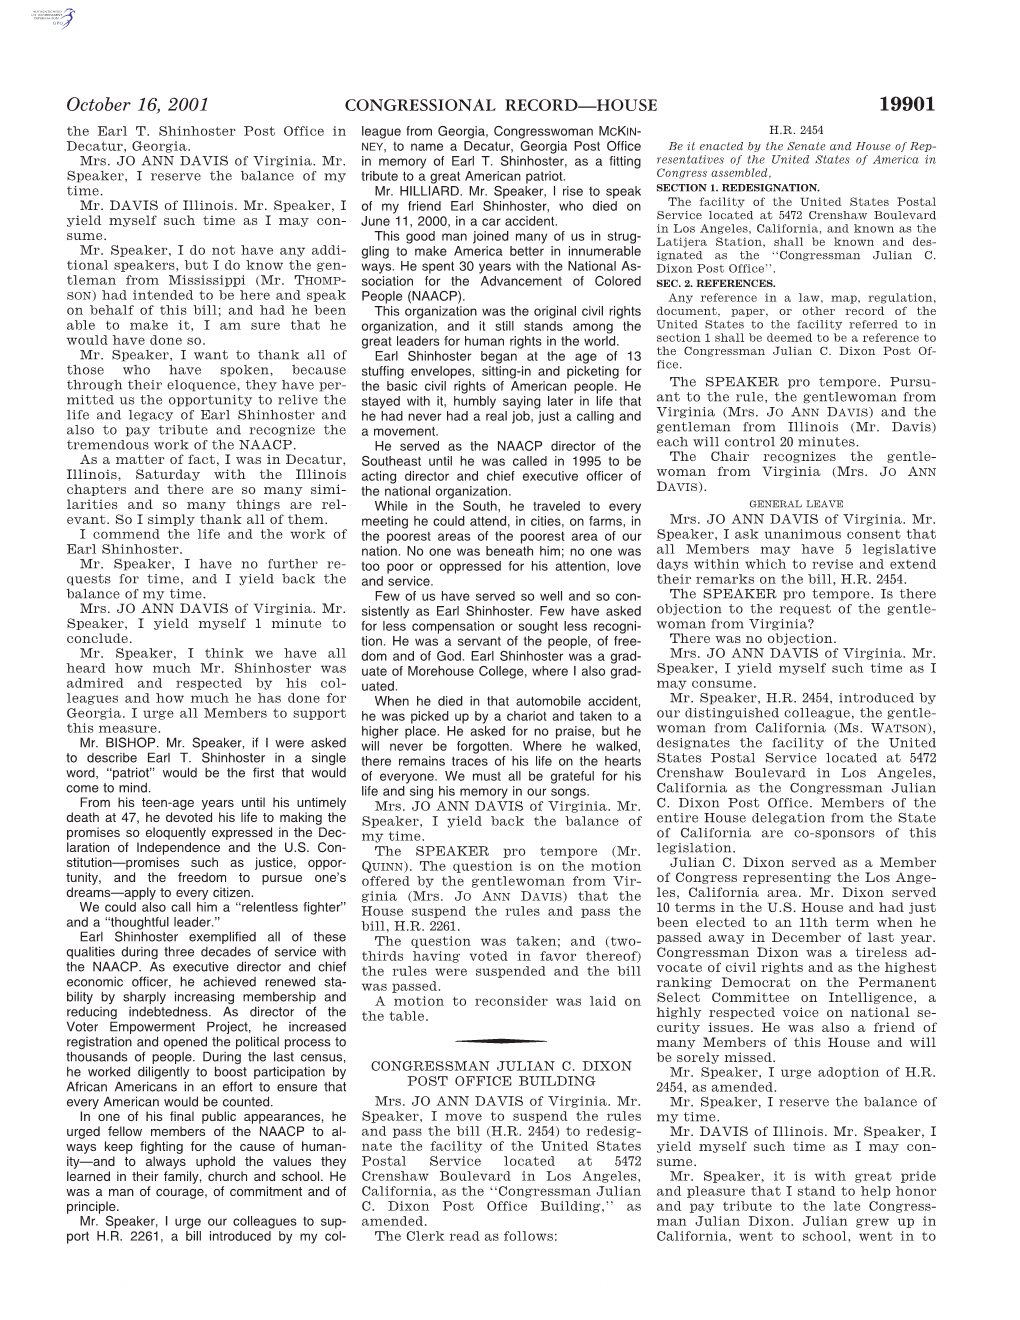 CONGRESSIONAL RECORD—HOUSE October 16, 2001 the Military, Returned Home, Finished Lect Committee on Intelligence